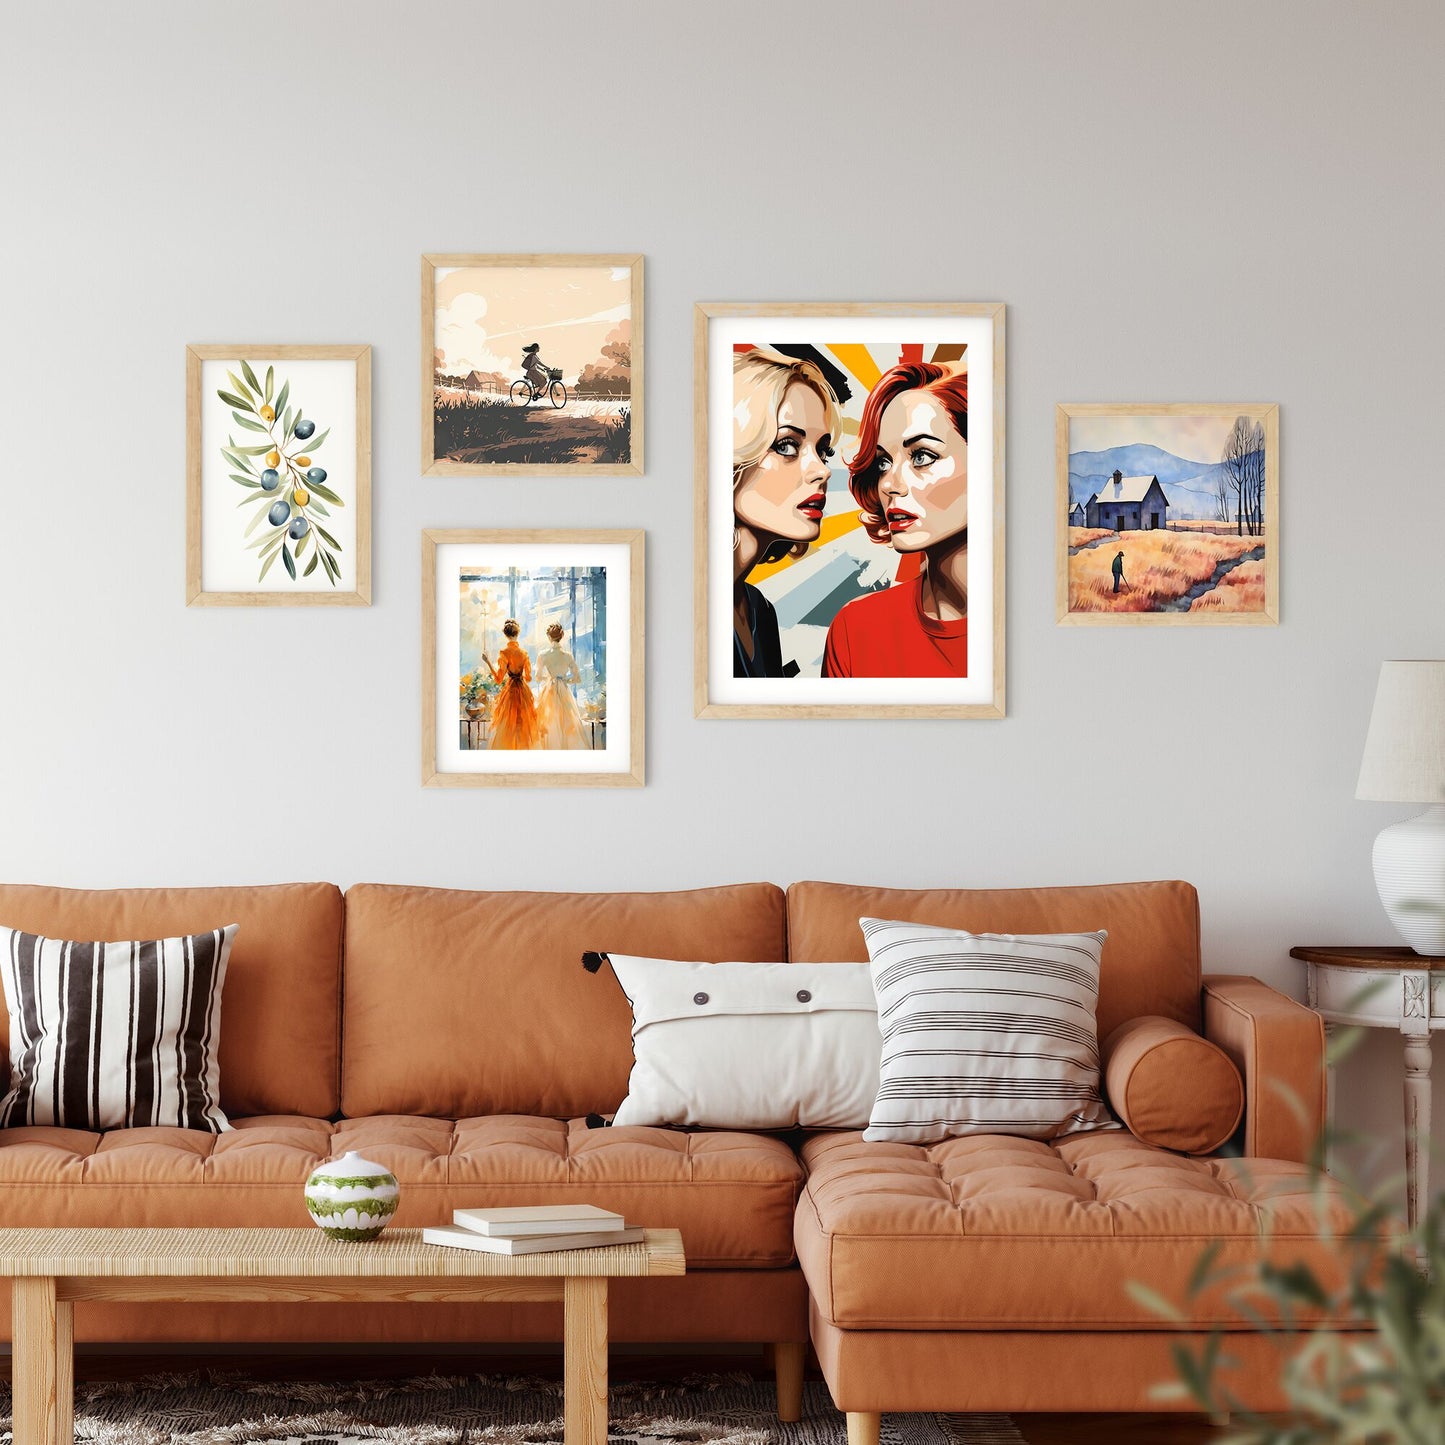 Woman Looking At Another Woman Art Print Default Title